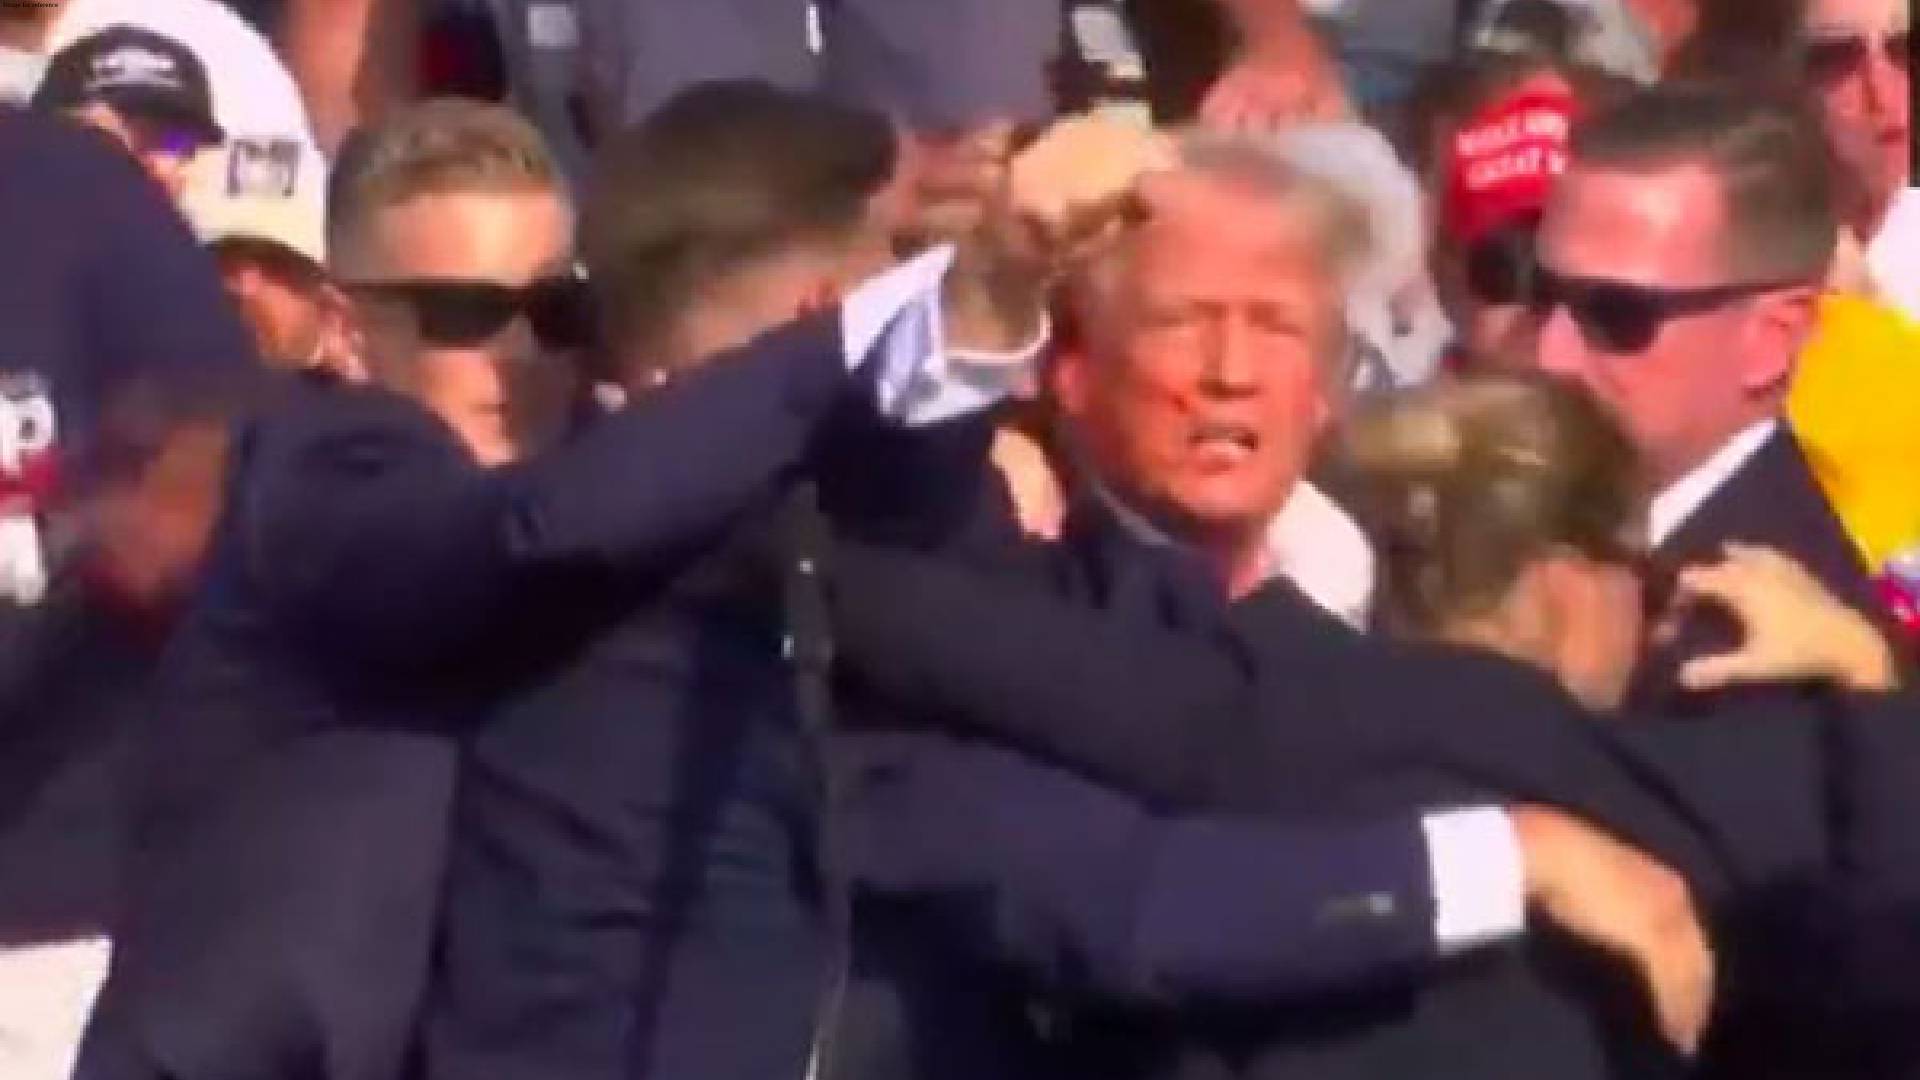 Gunfire at Donald Trump's rally in Pennsylvania, secret service escorts former US President to safety